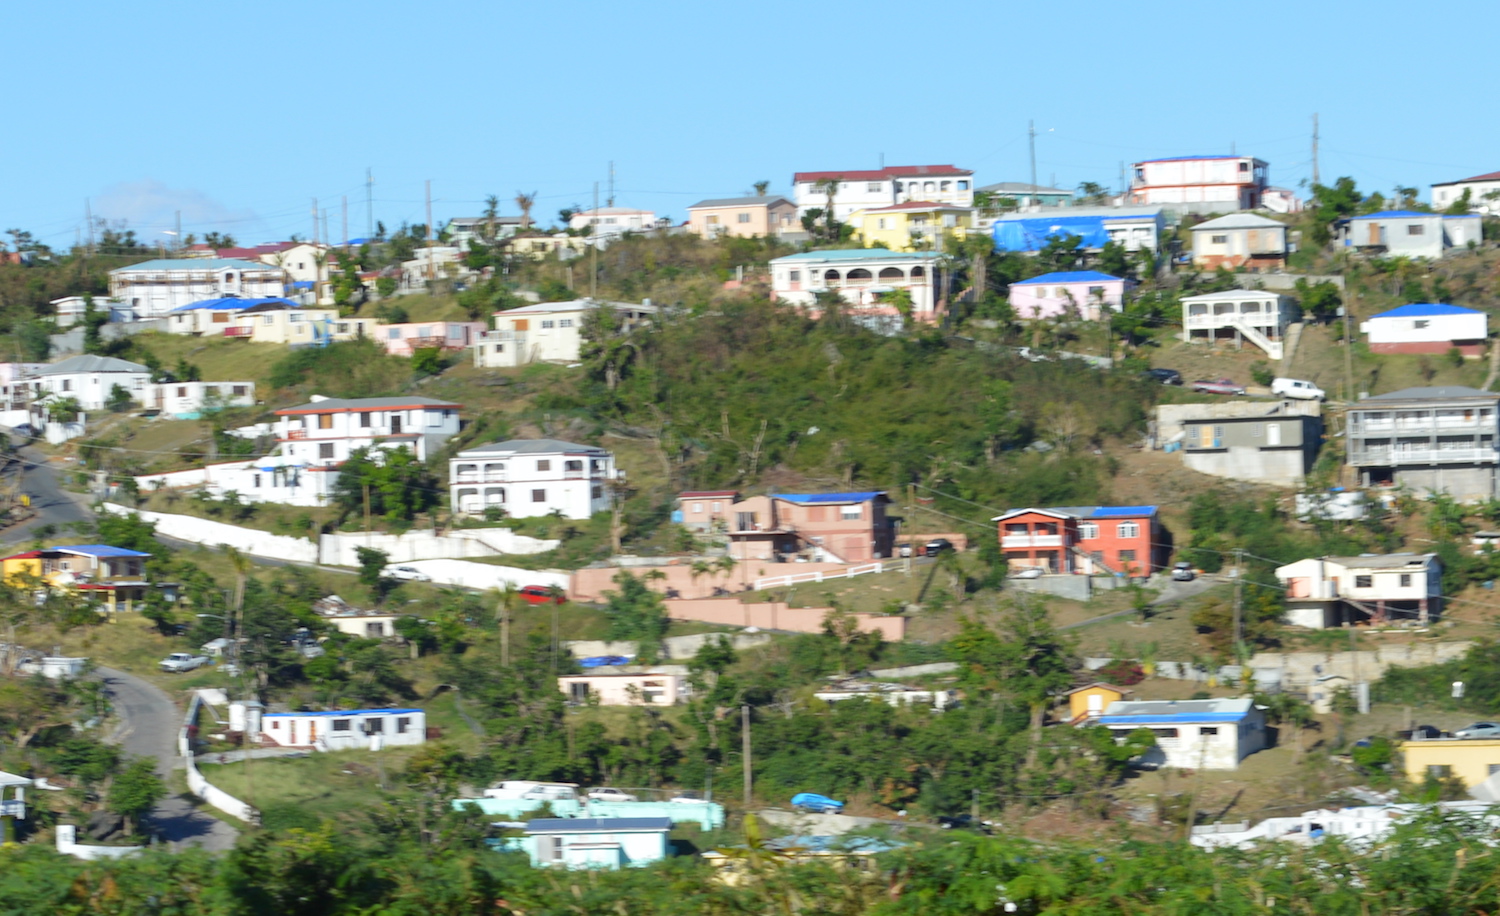 Blue tarps covering damaged roofs dot the landscape of Estate Tutu on St. Thomas in March 2018 after 2017's pair of hurricanes battered the territory. (Bill Kossler photo)